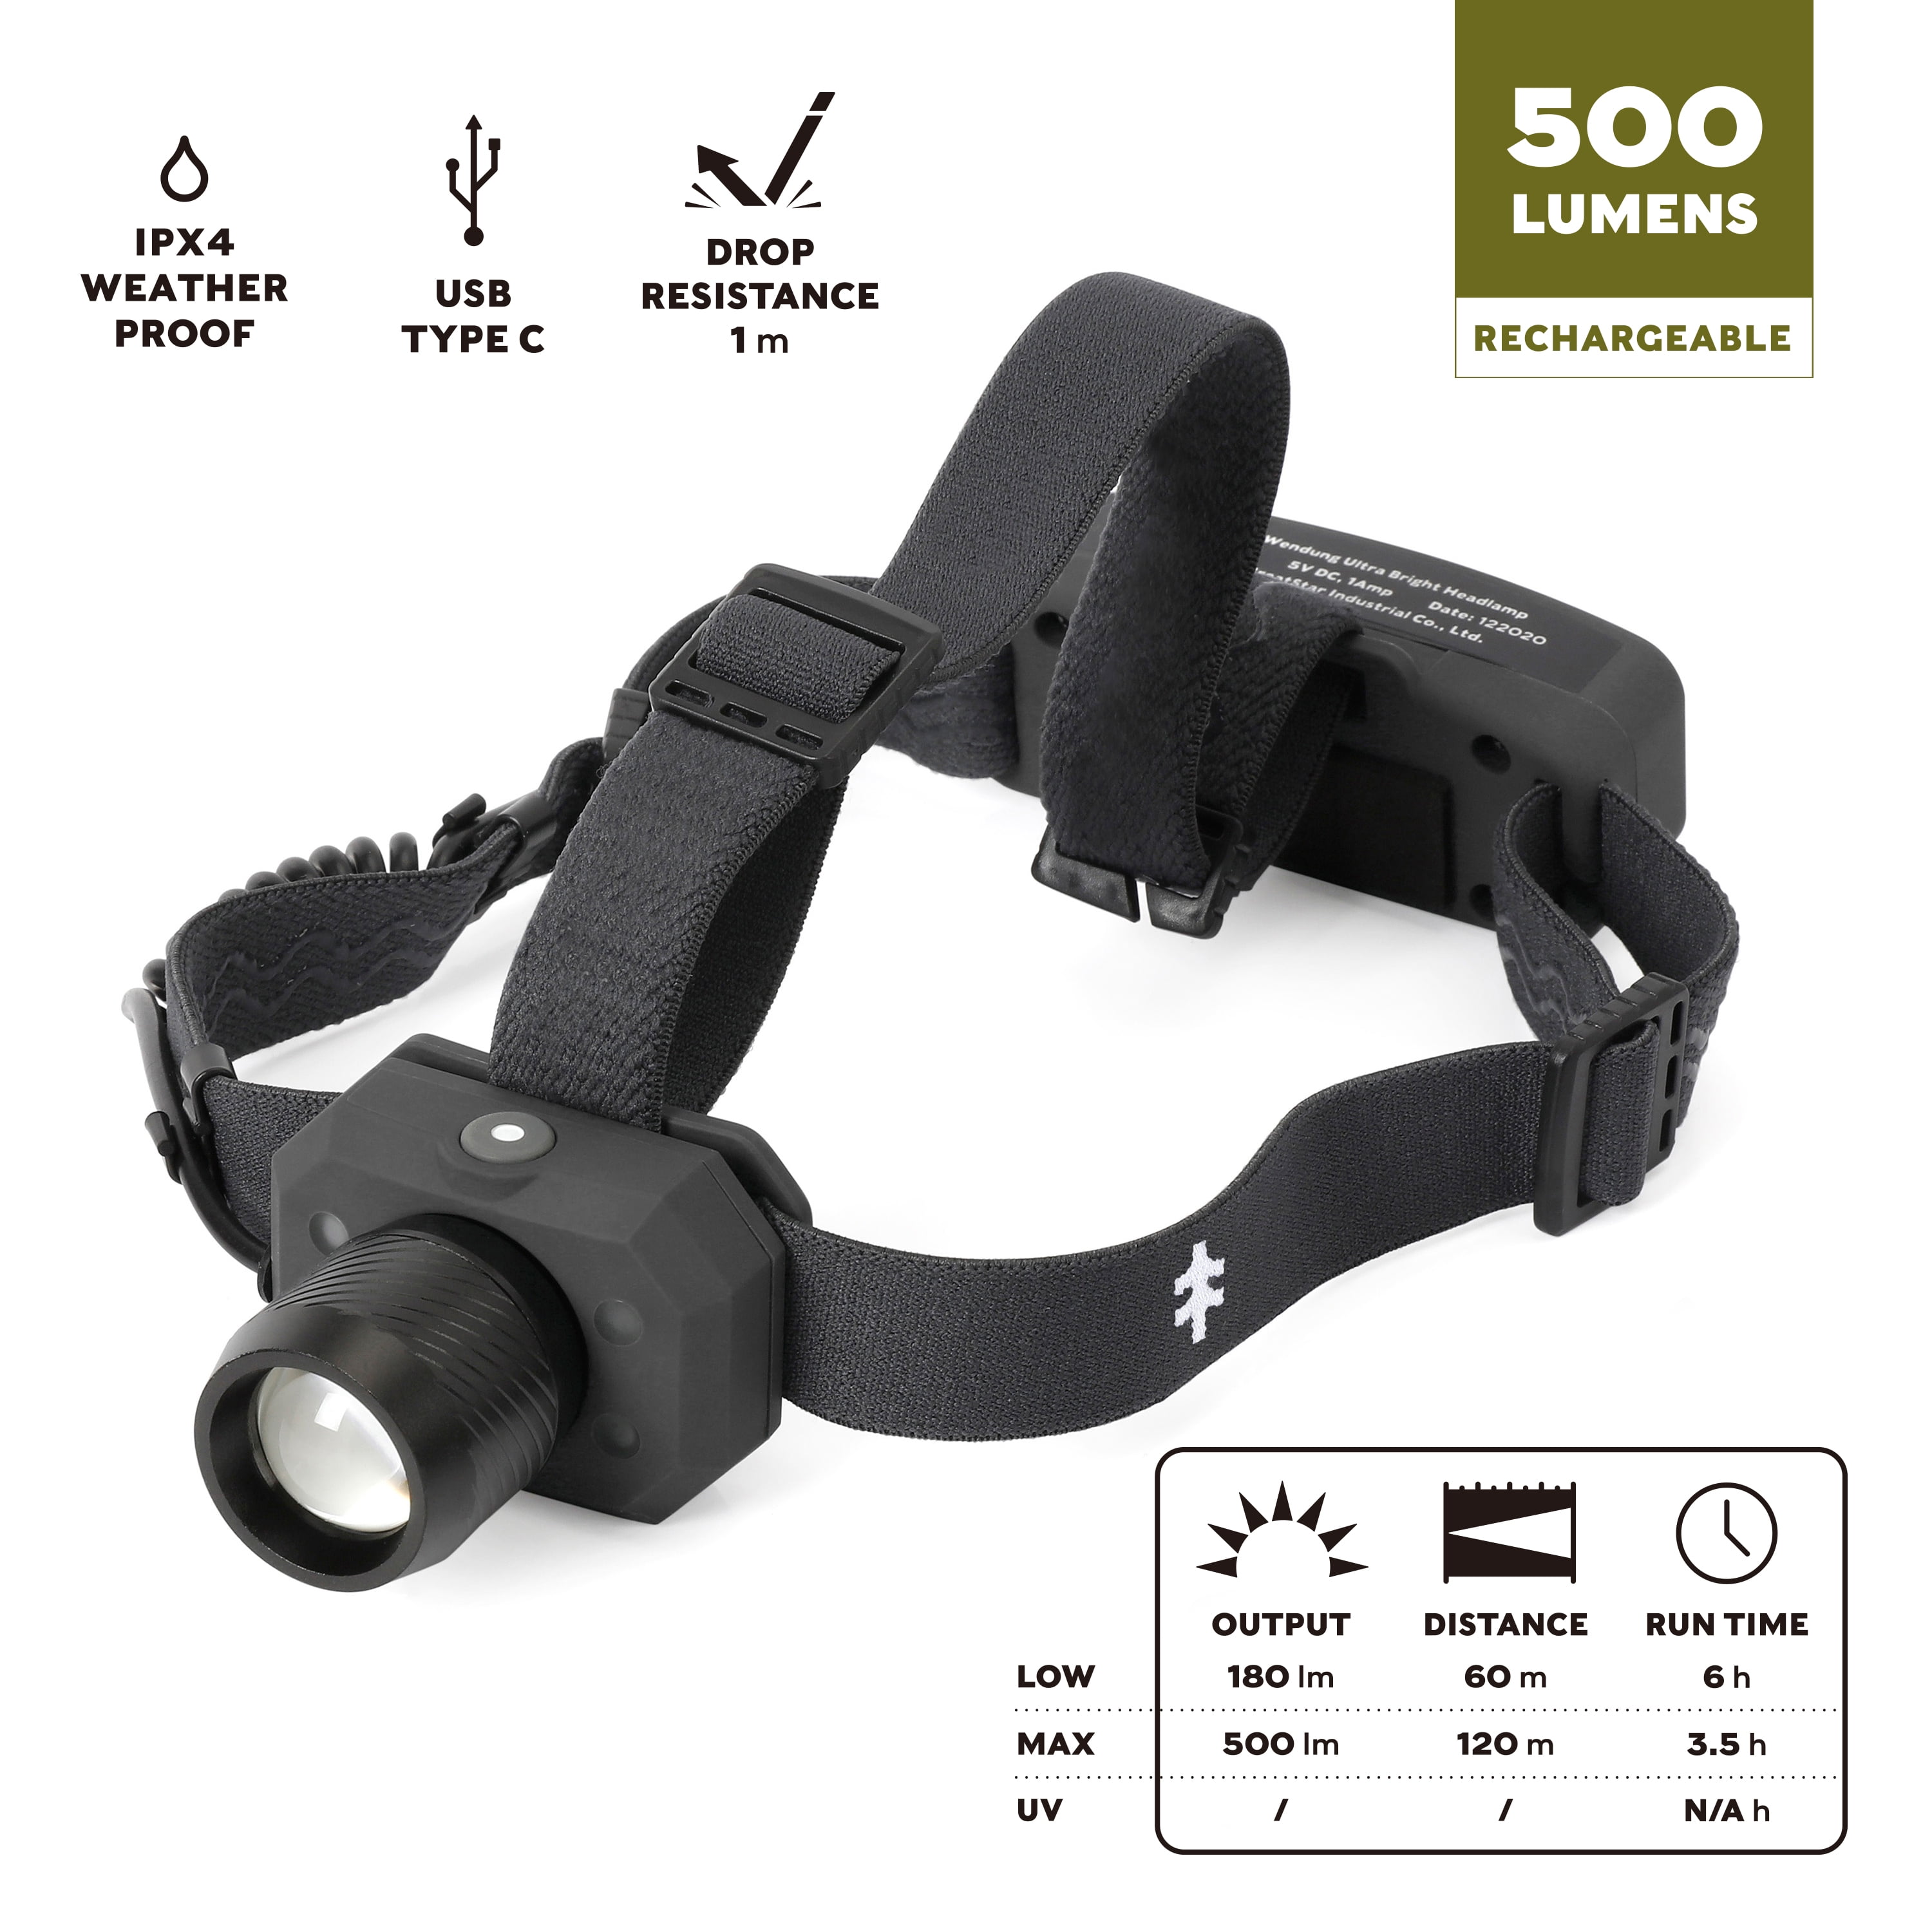 LED Hands-free Headlamp By Mhil * Battery Powered Flashlight / Headlight * Great for Camping Using Without Hands * Adjustable 3-way Light & Adjustable Head Strap Hiking Working in the Dark 